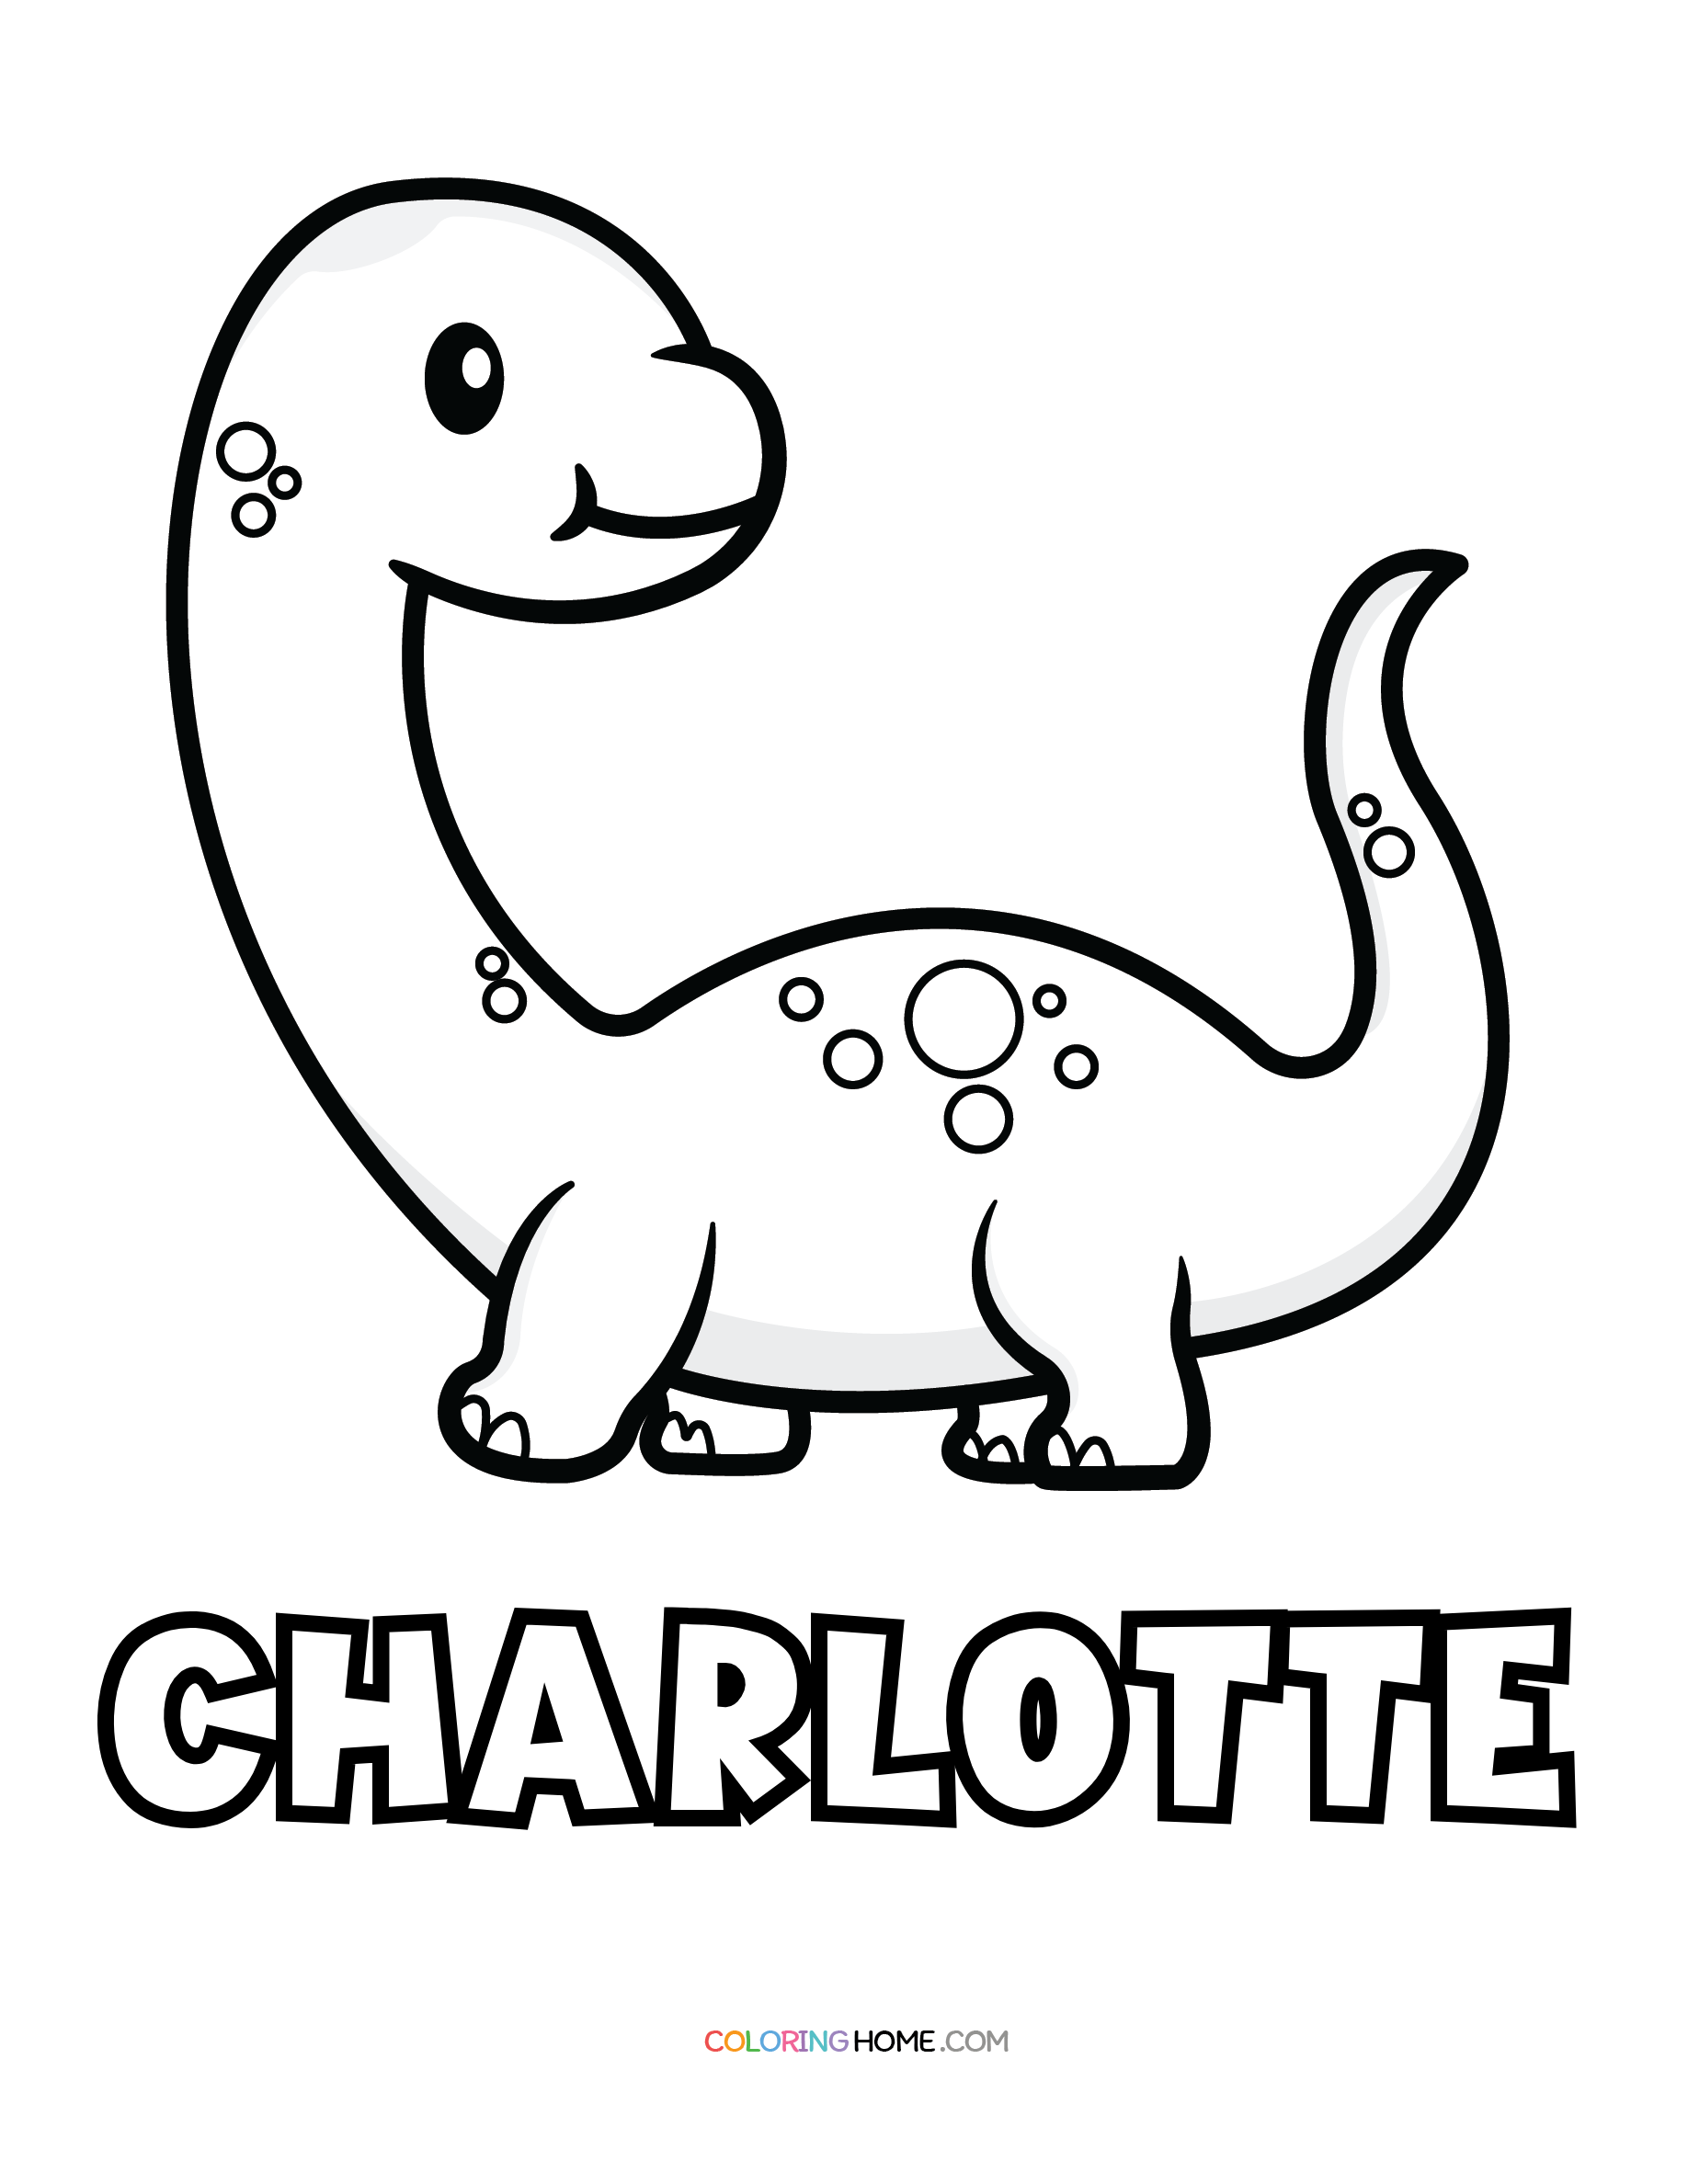 Charlotte dinosaur coloring page